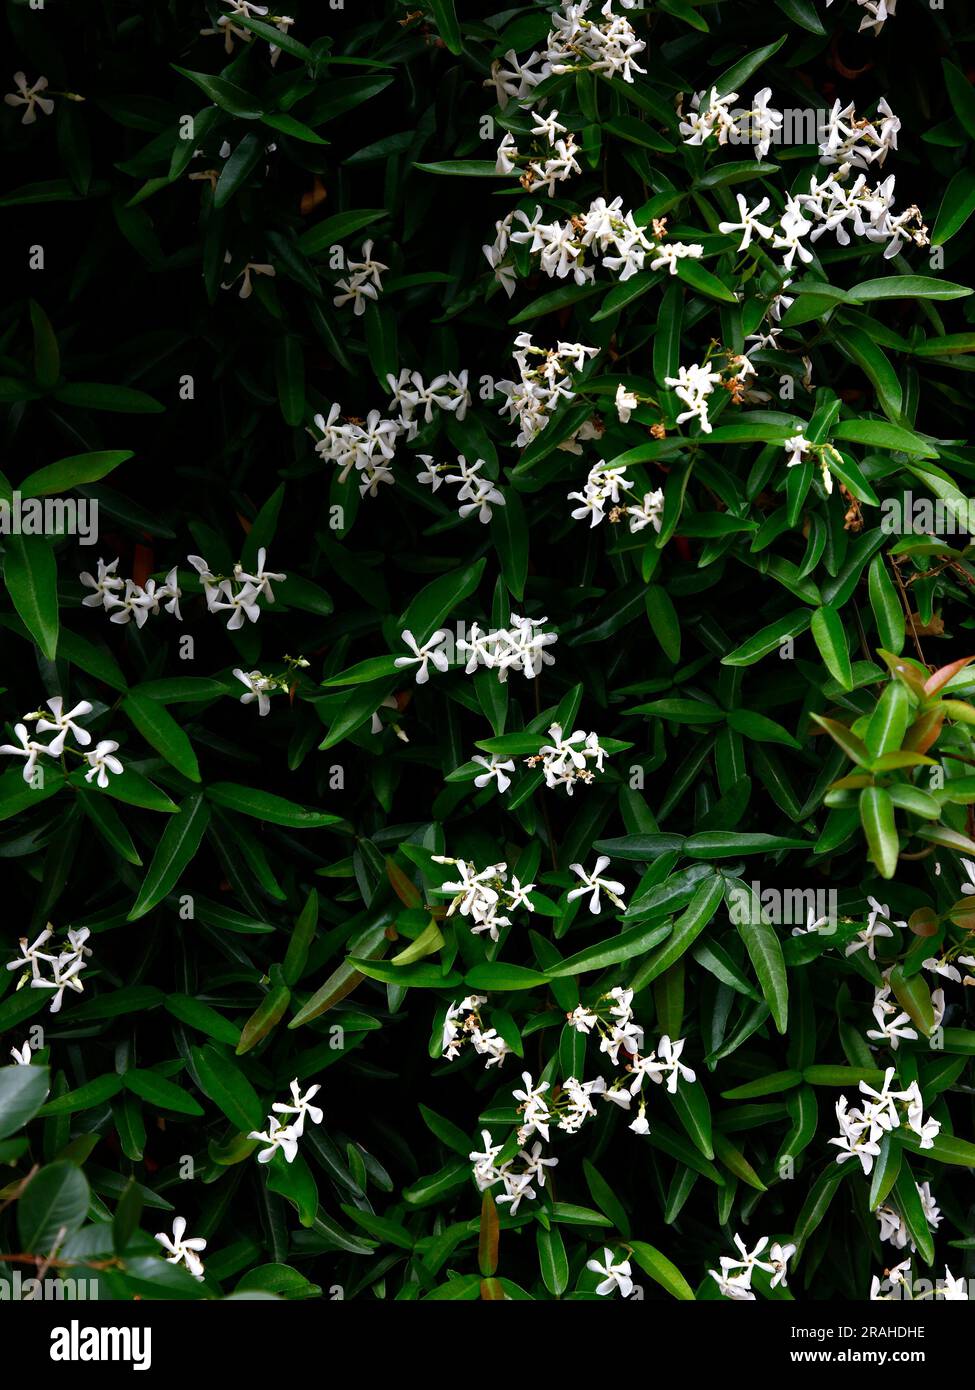 Closeup of the white flowering evergreen garden climbing plant trachelospermum jasminoides waterwheel seen with flowers and green leaves. Stock Photo